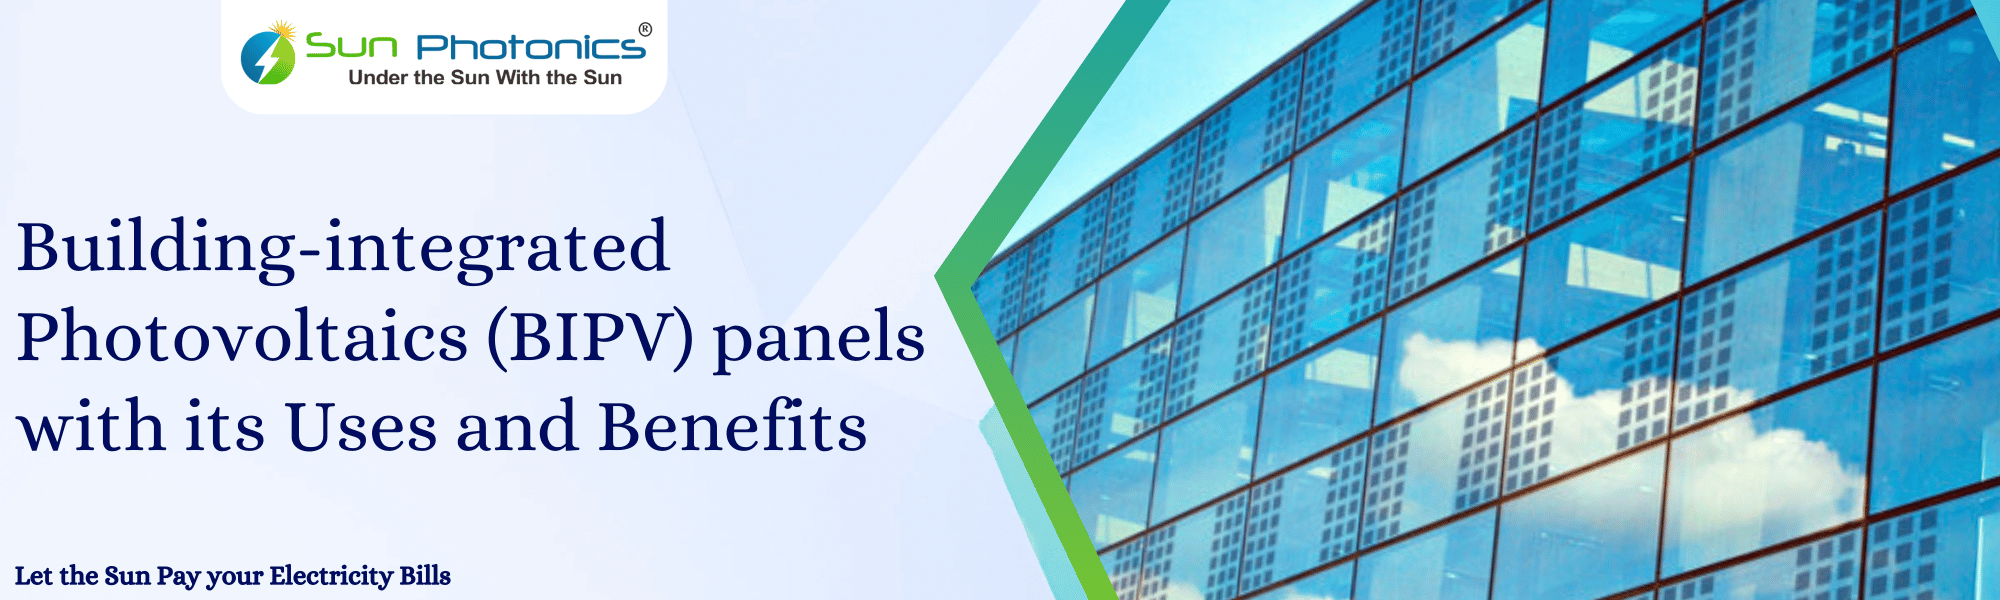 Building-Integrated Photovoltaics (BIPV) panels – Uses and Benefits